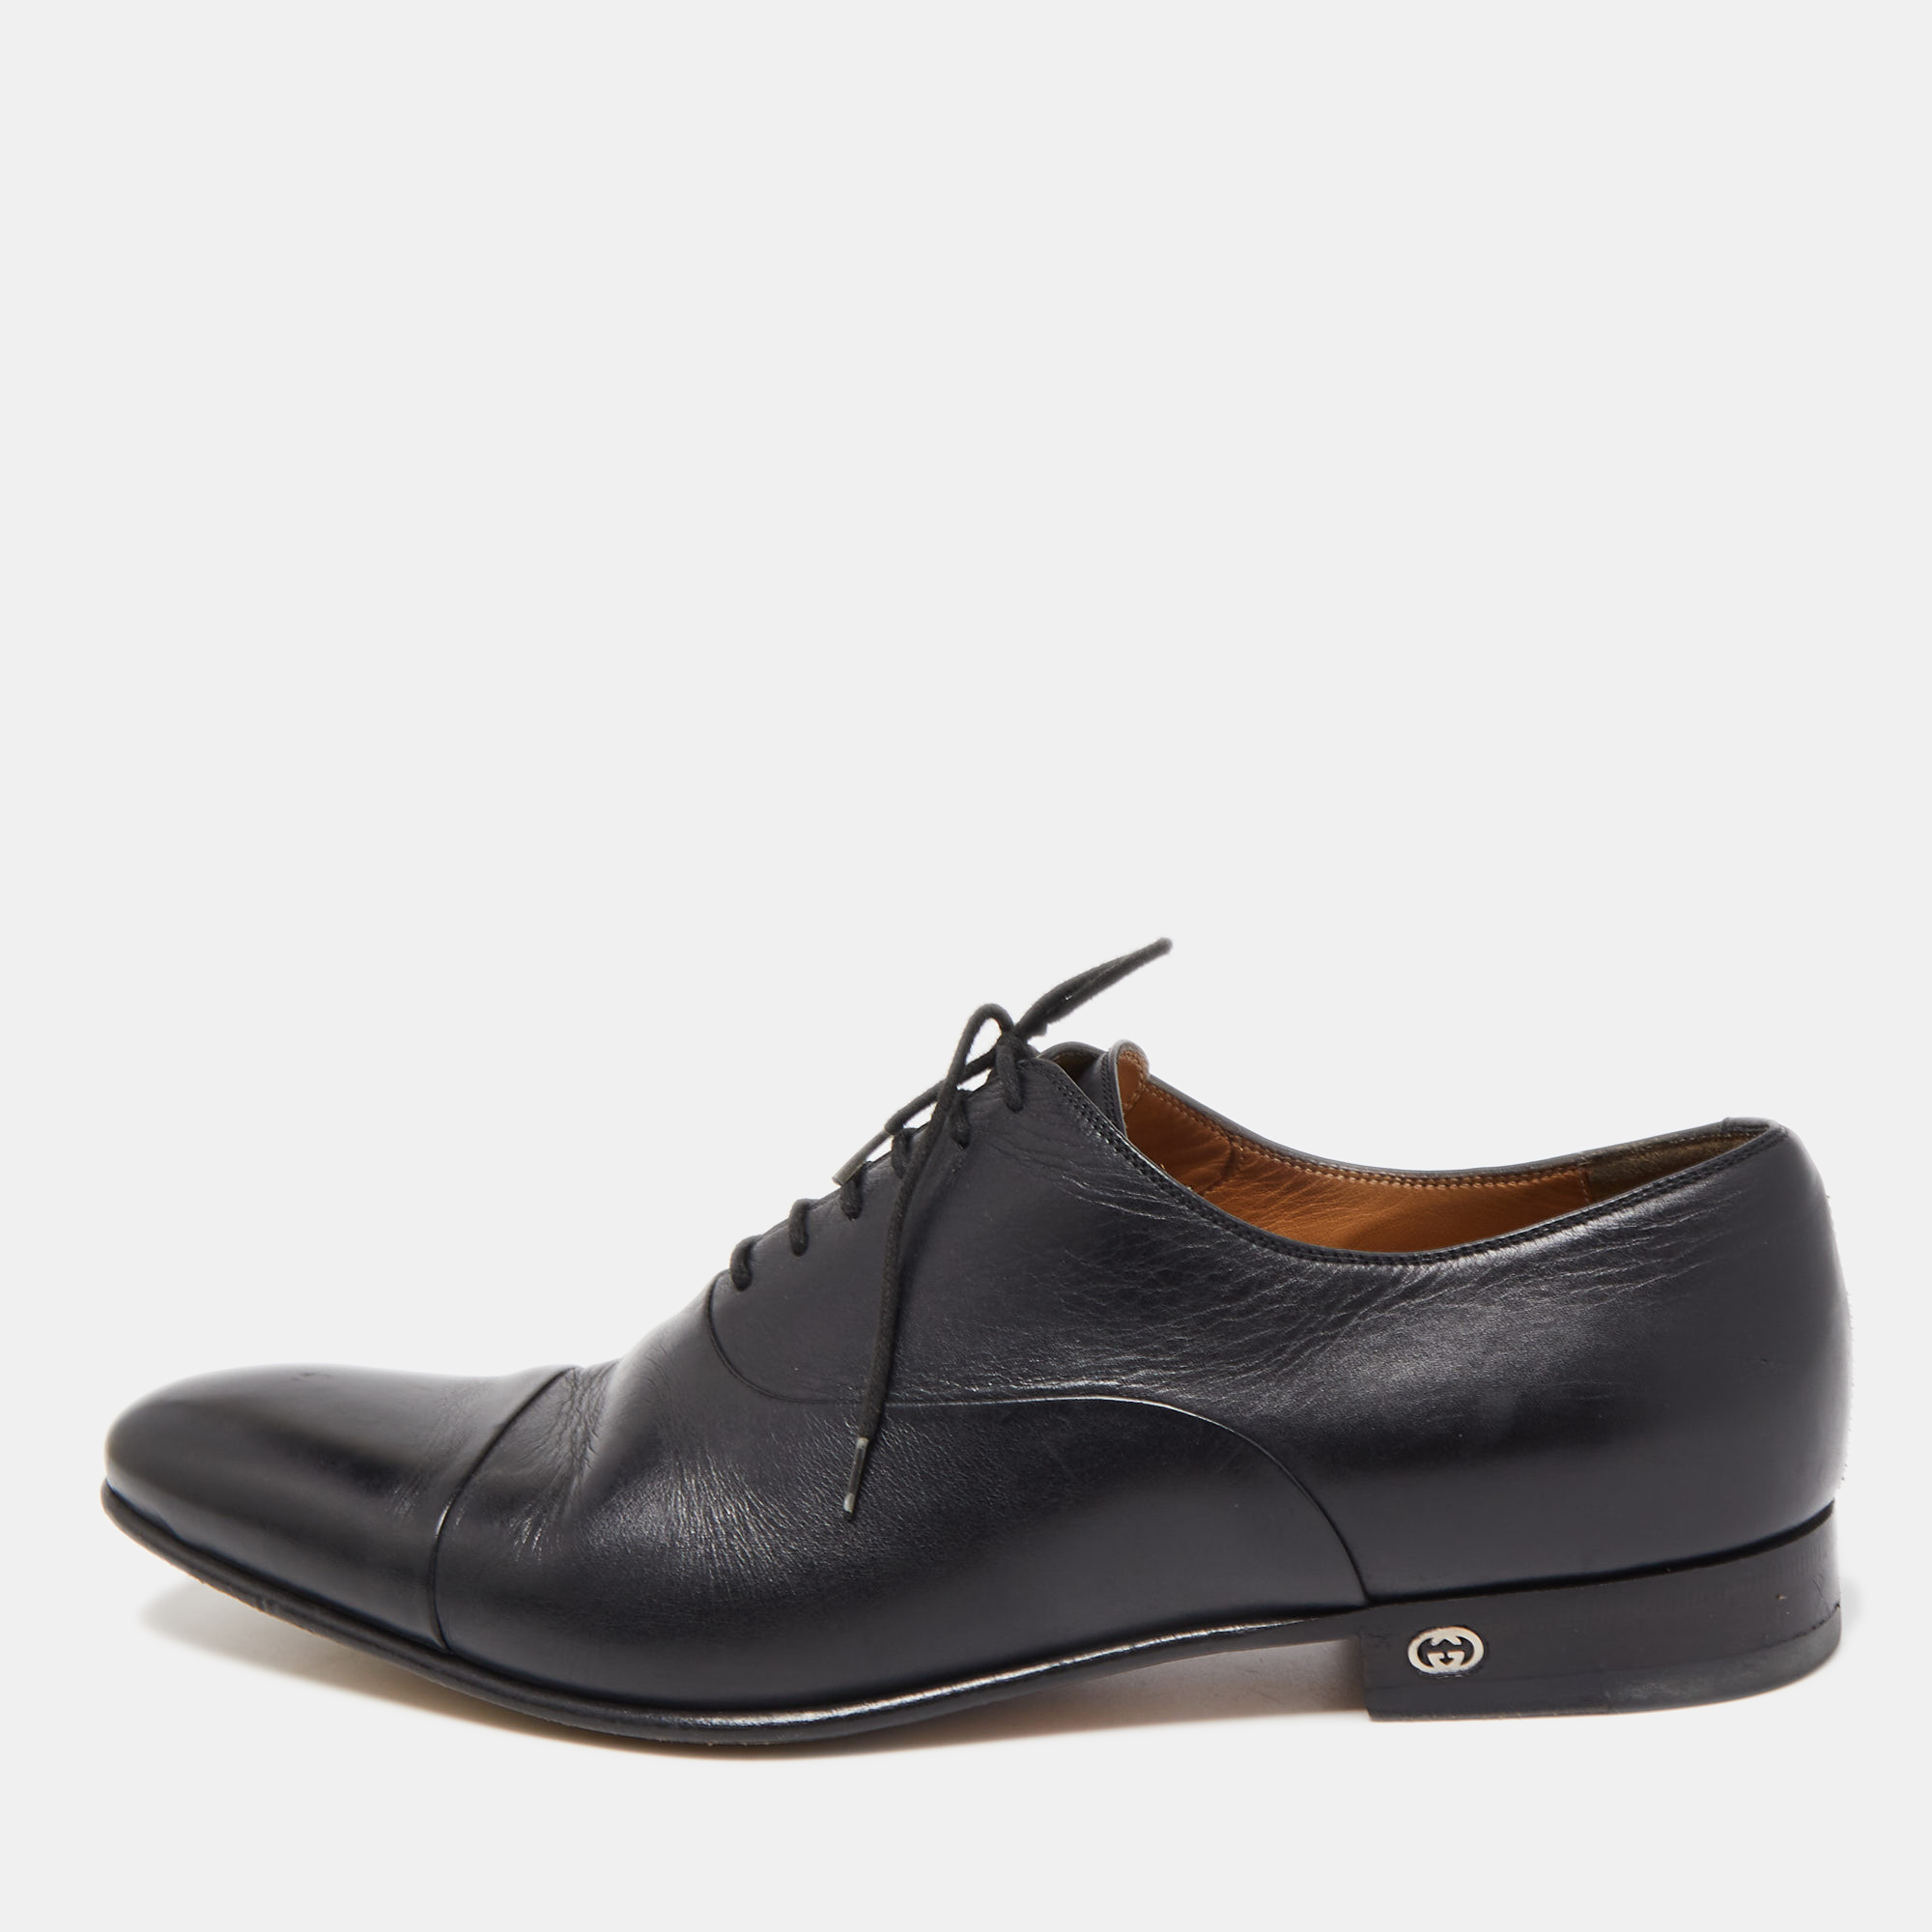 Gucci Black Leather Lace Up Oxfords Size 43